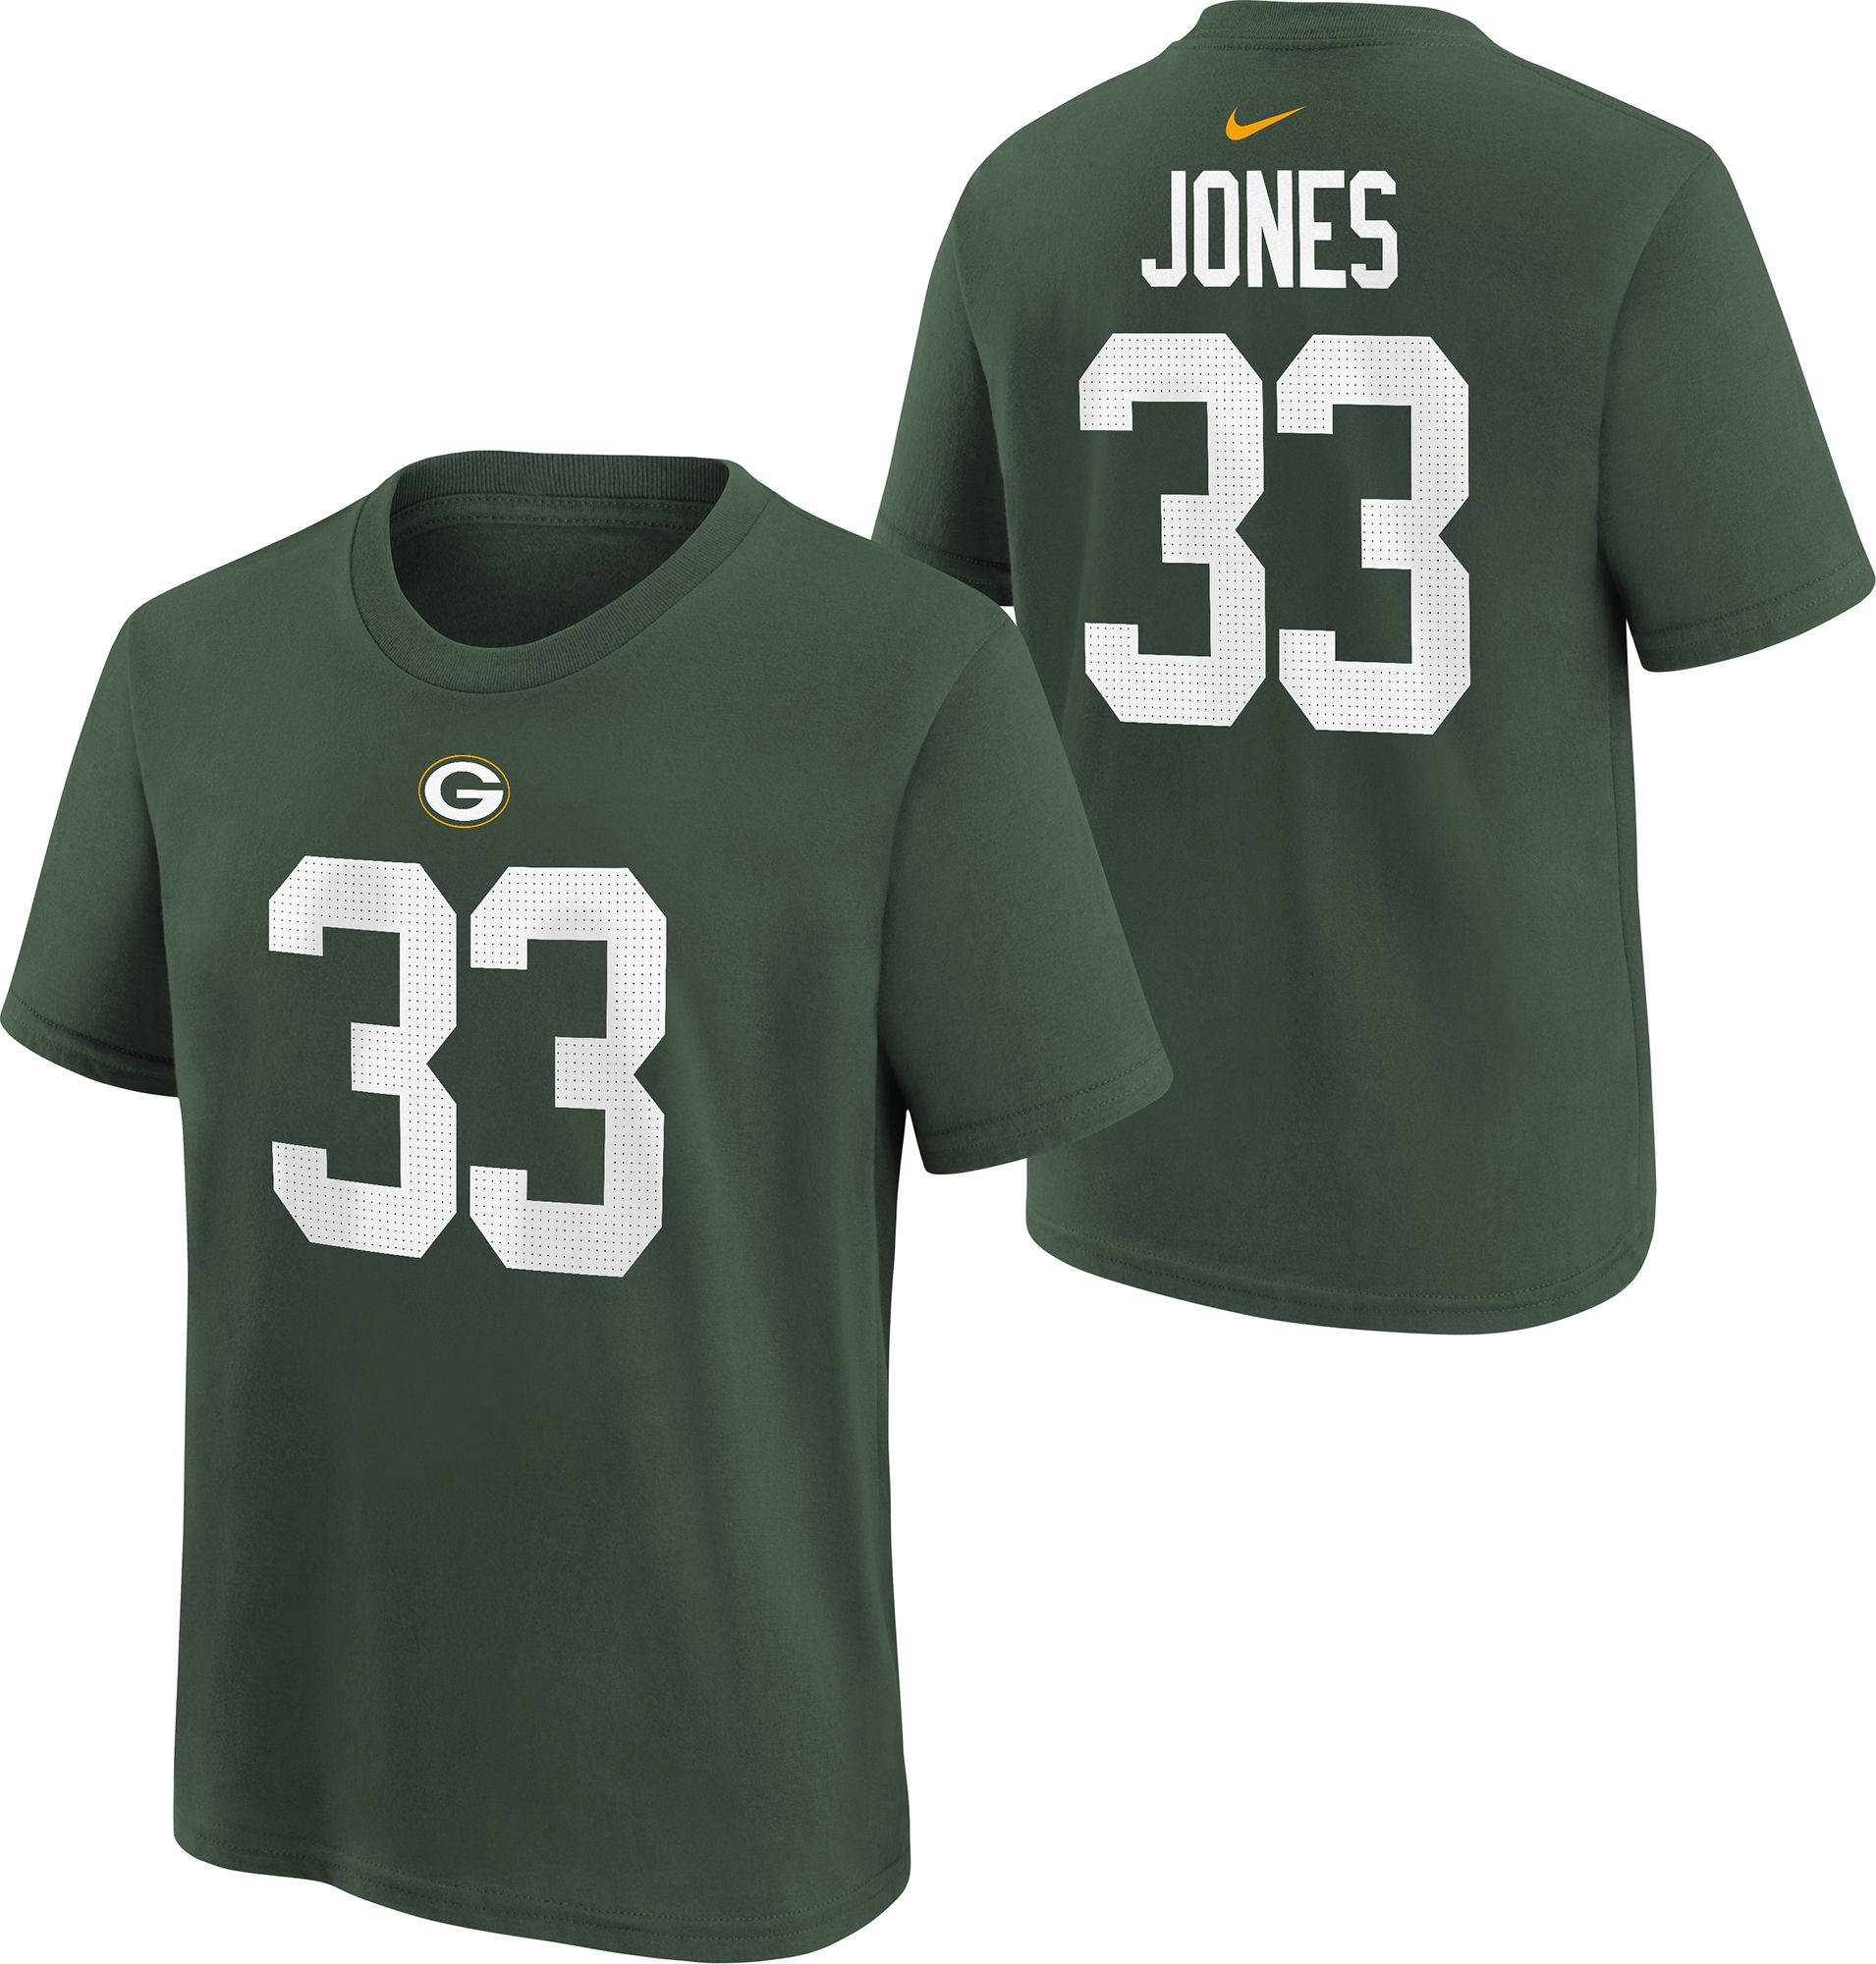 Nike Green Bay Packers No33 Aaron Jones White Men's Stitched NFL Elite Jersey